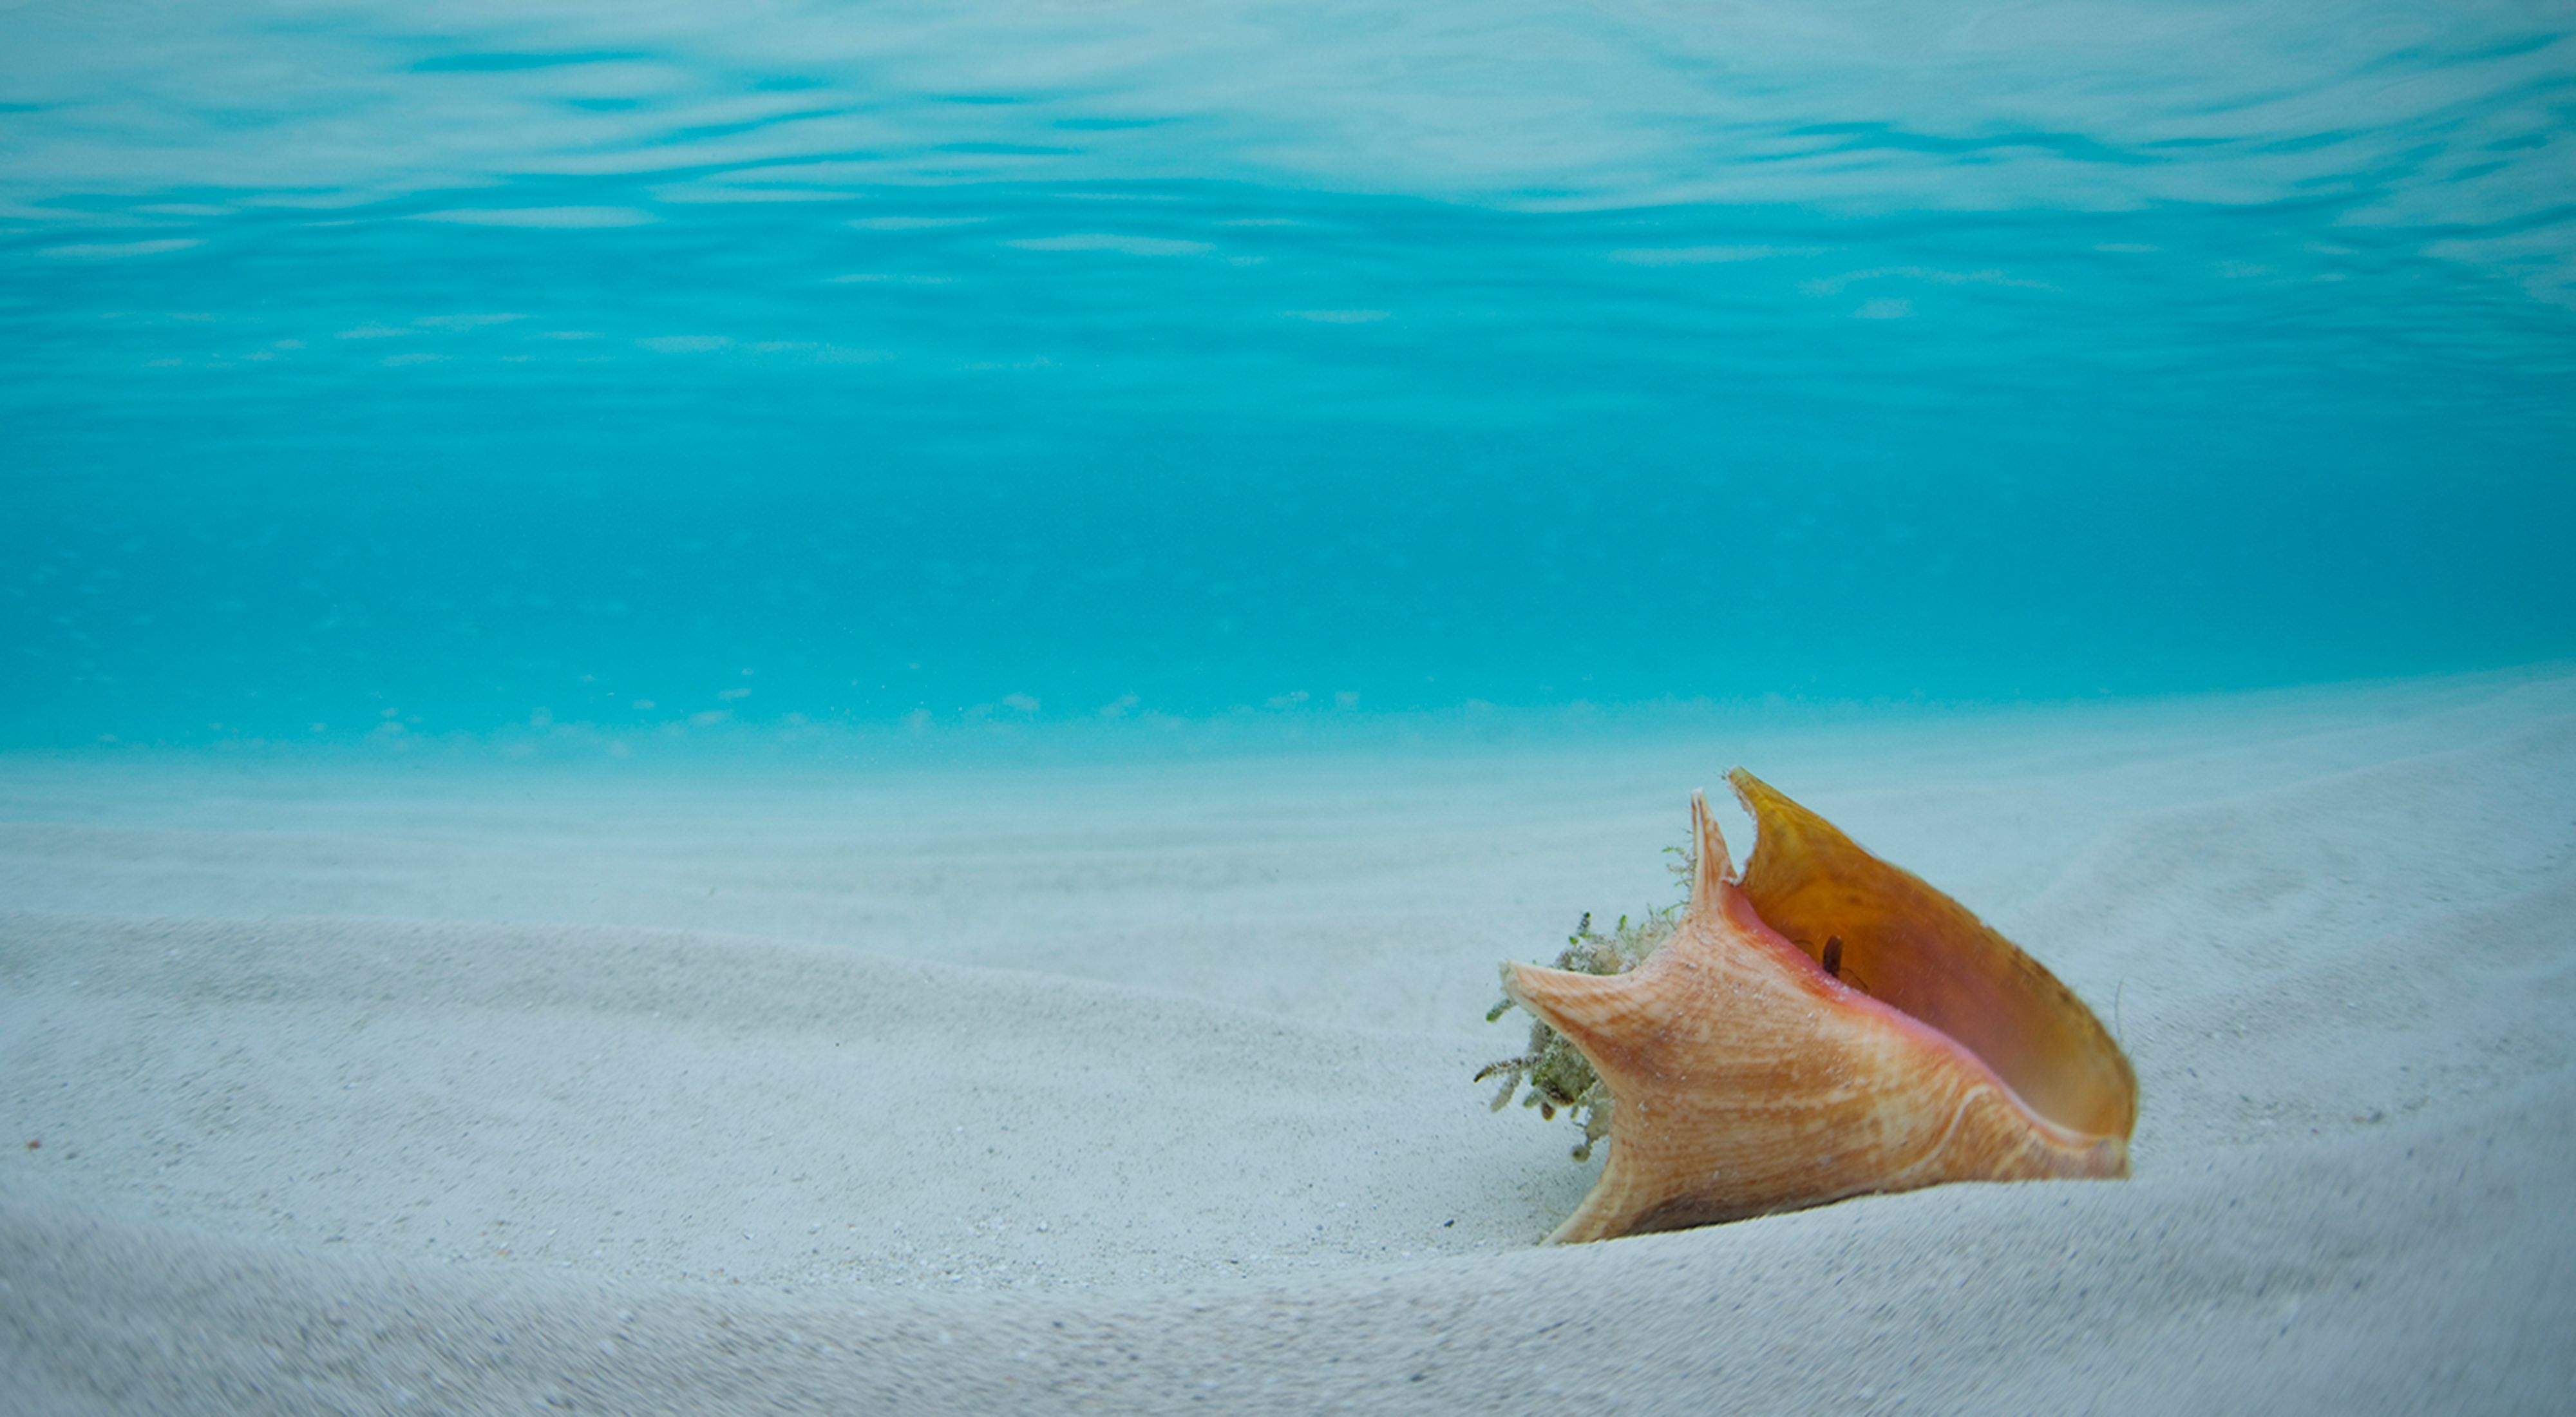 A queen conch in the Exuma Cays of The Bahamas